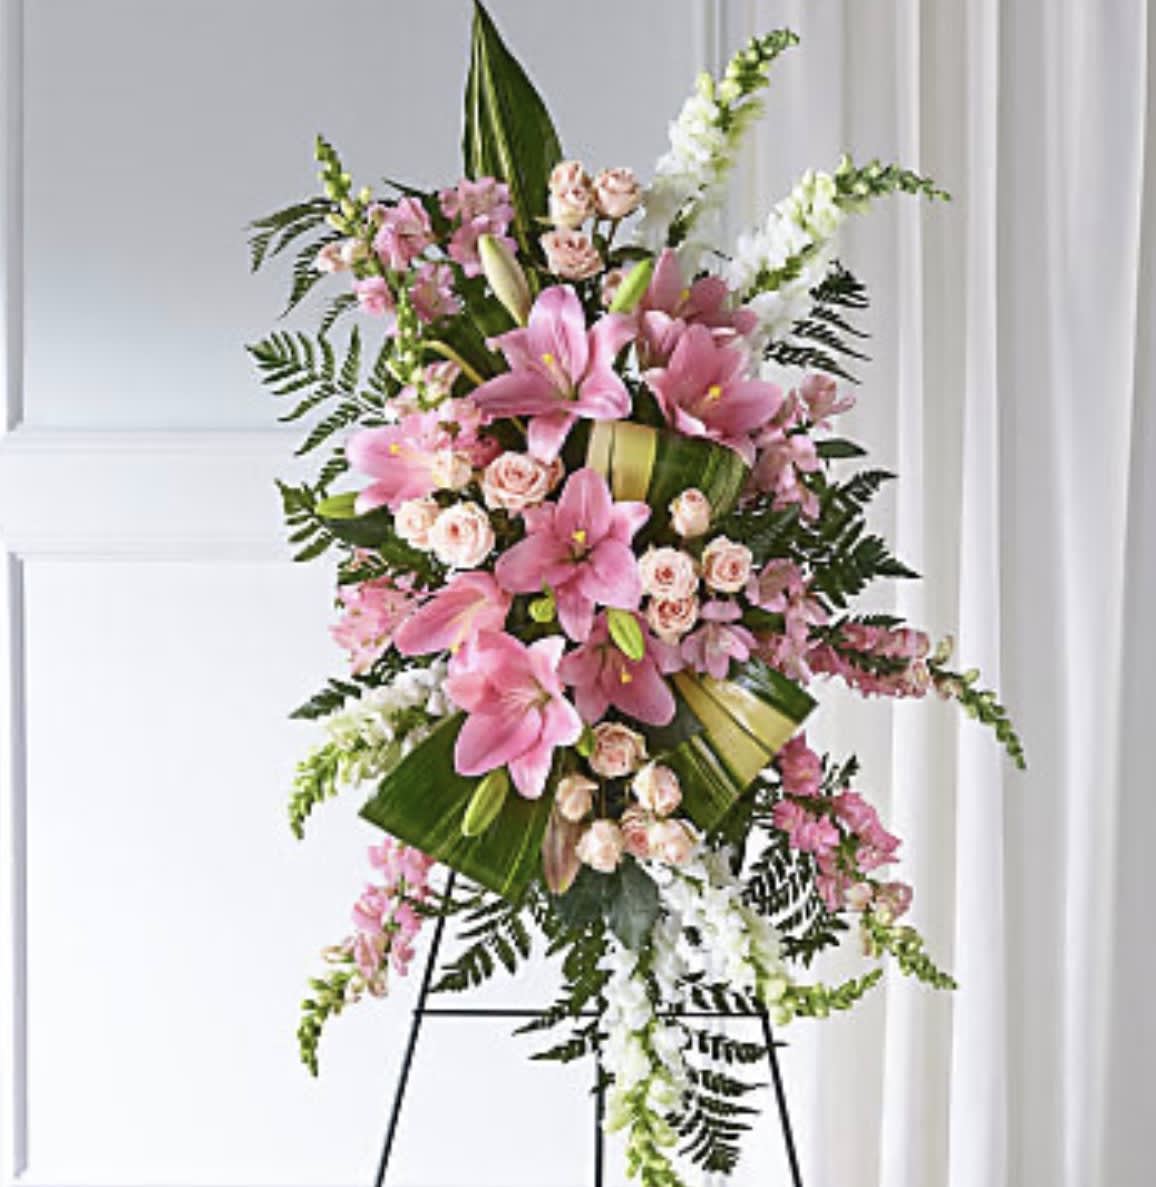 Elegant Embrace Standing Spray - ELEGANT EMBRACE STANDING SPRAY  Our Elegant Embrace Standing Spray shares the warmth and comfort your loved ones need during this difficult time through each blushing bloom. A local florist beautifully combines lilies, spray roses and snapdragons with greens to express your heartfelt love.